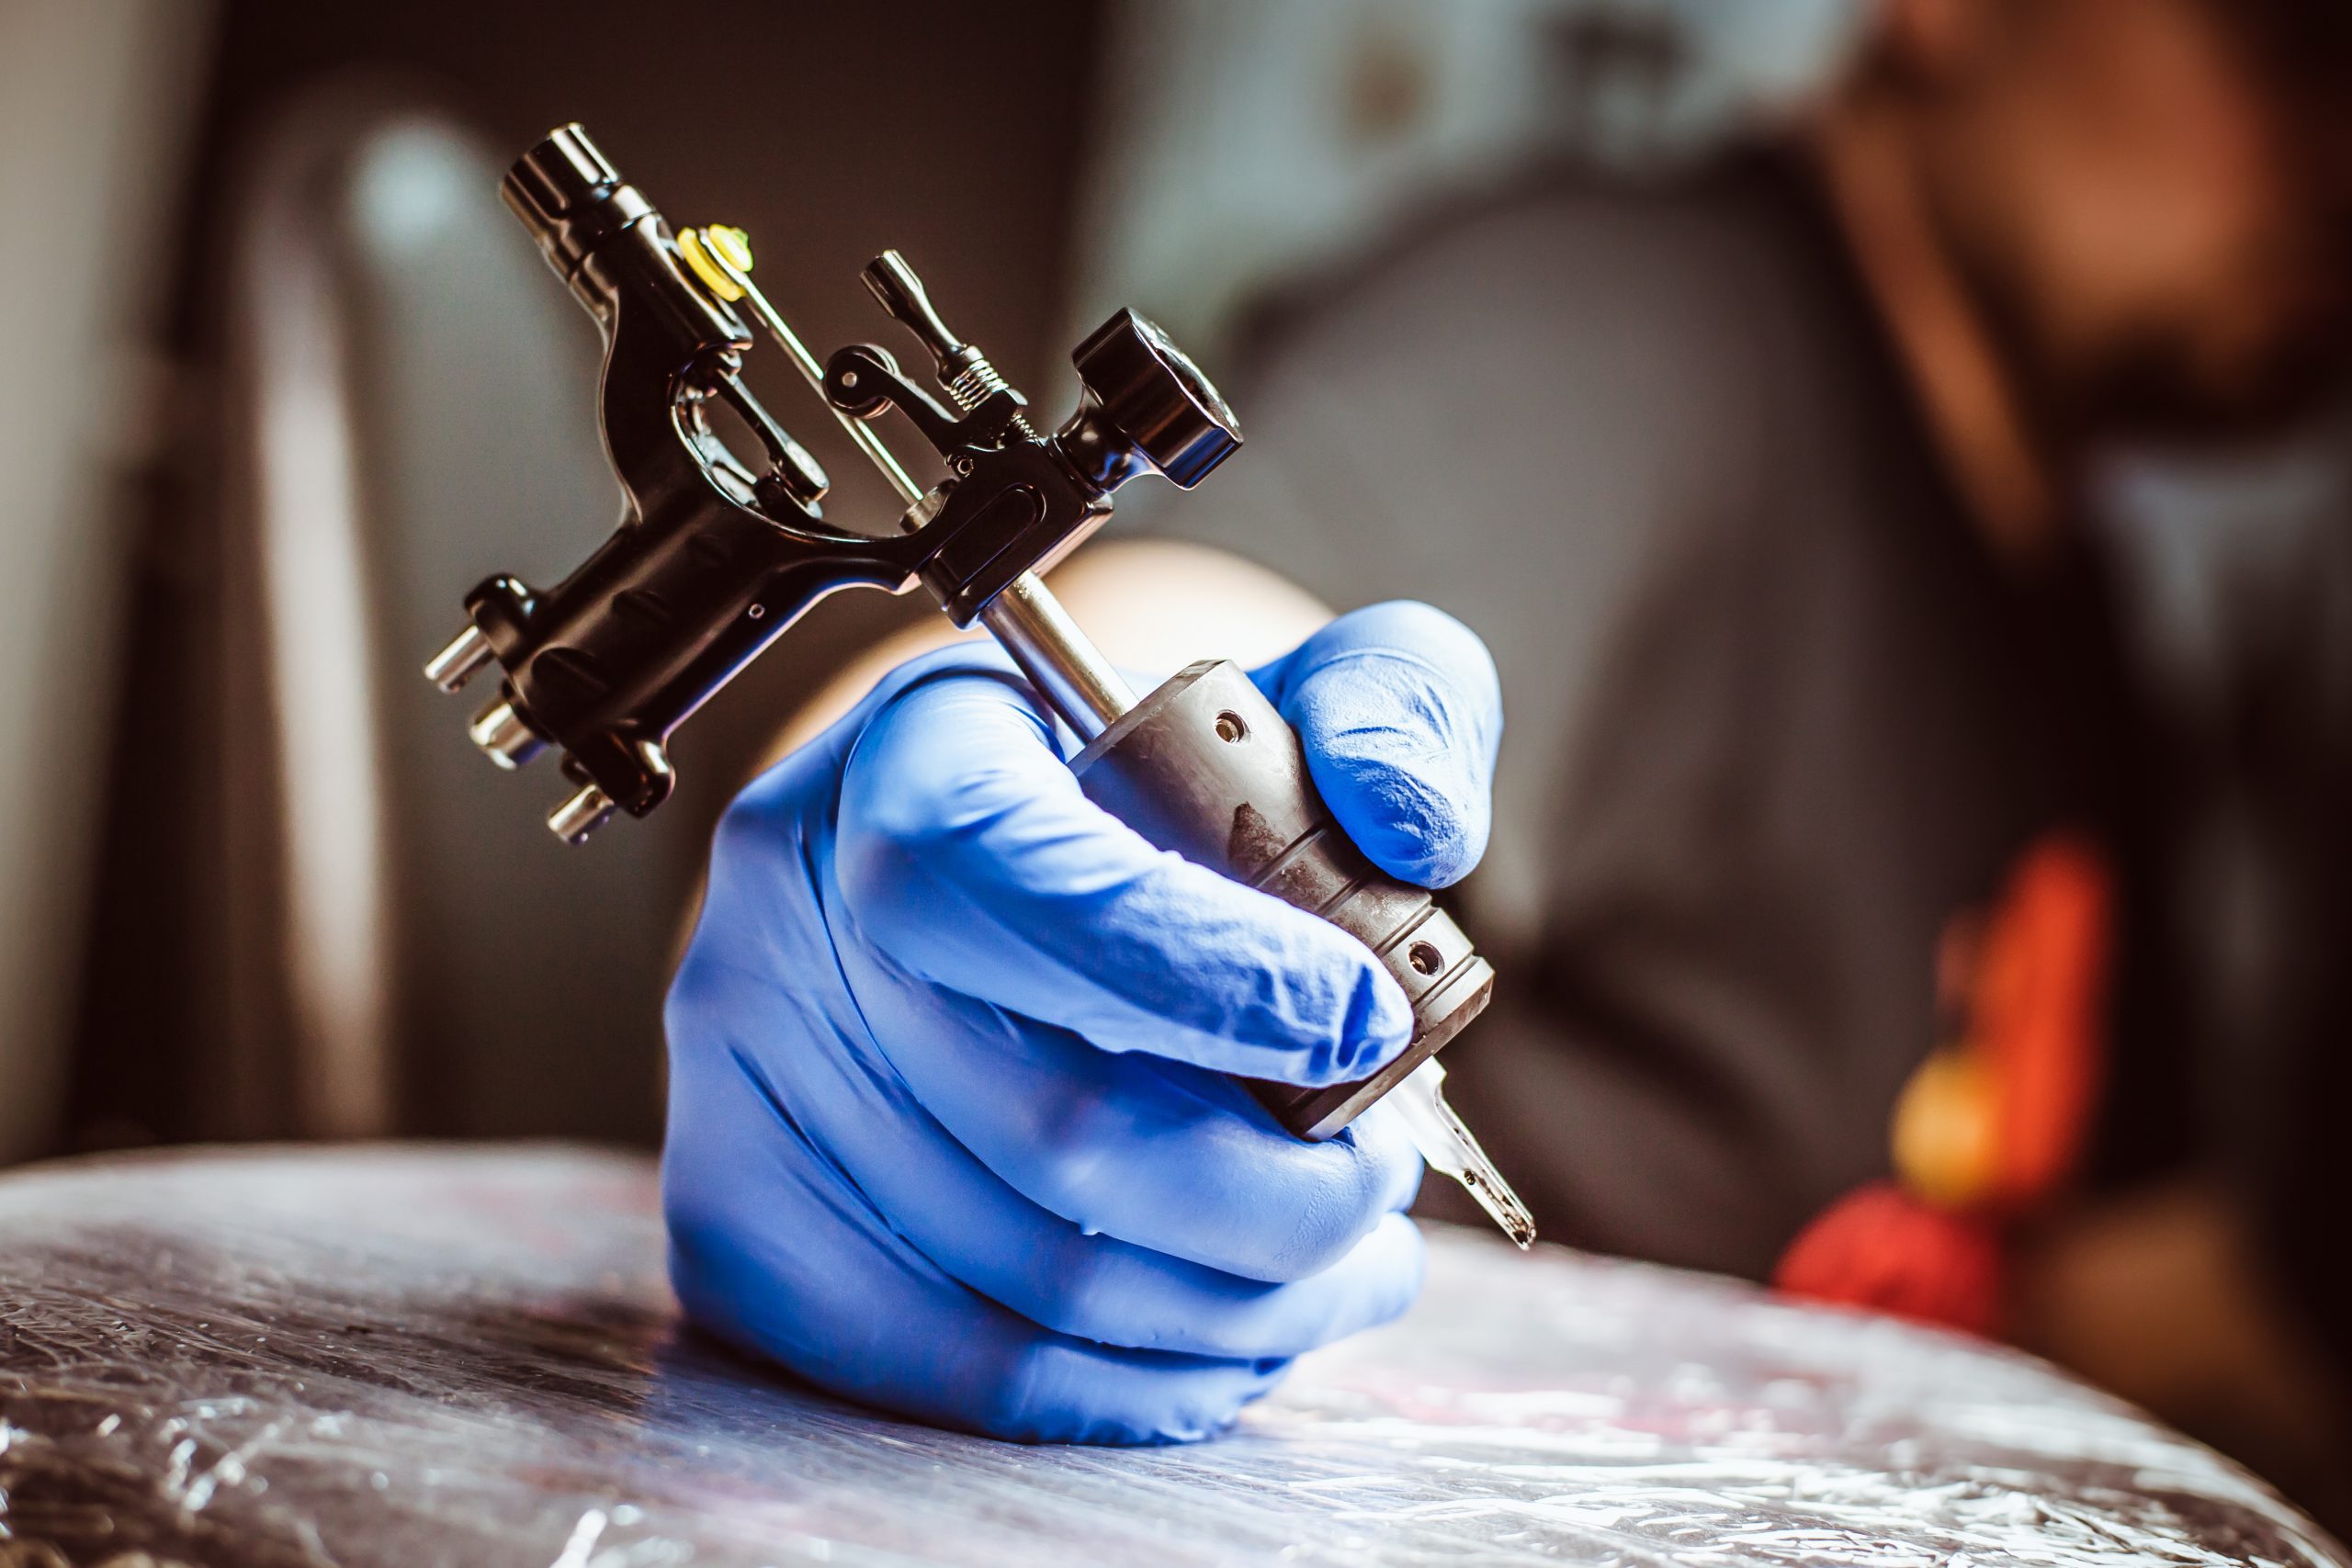 8 Best Tattoo Machines For Beginners to Use 2023 Review